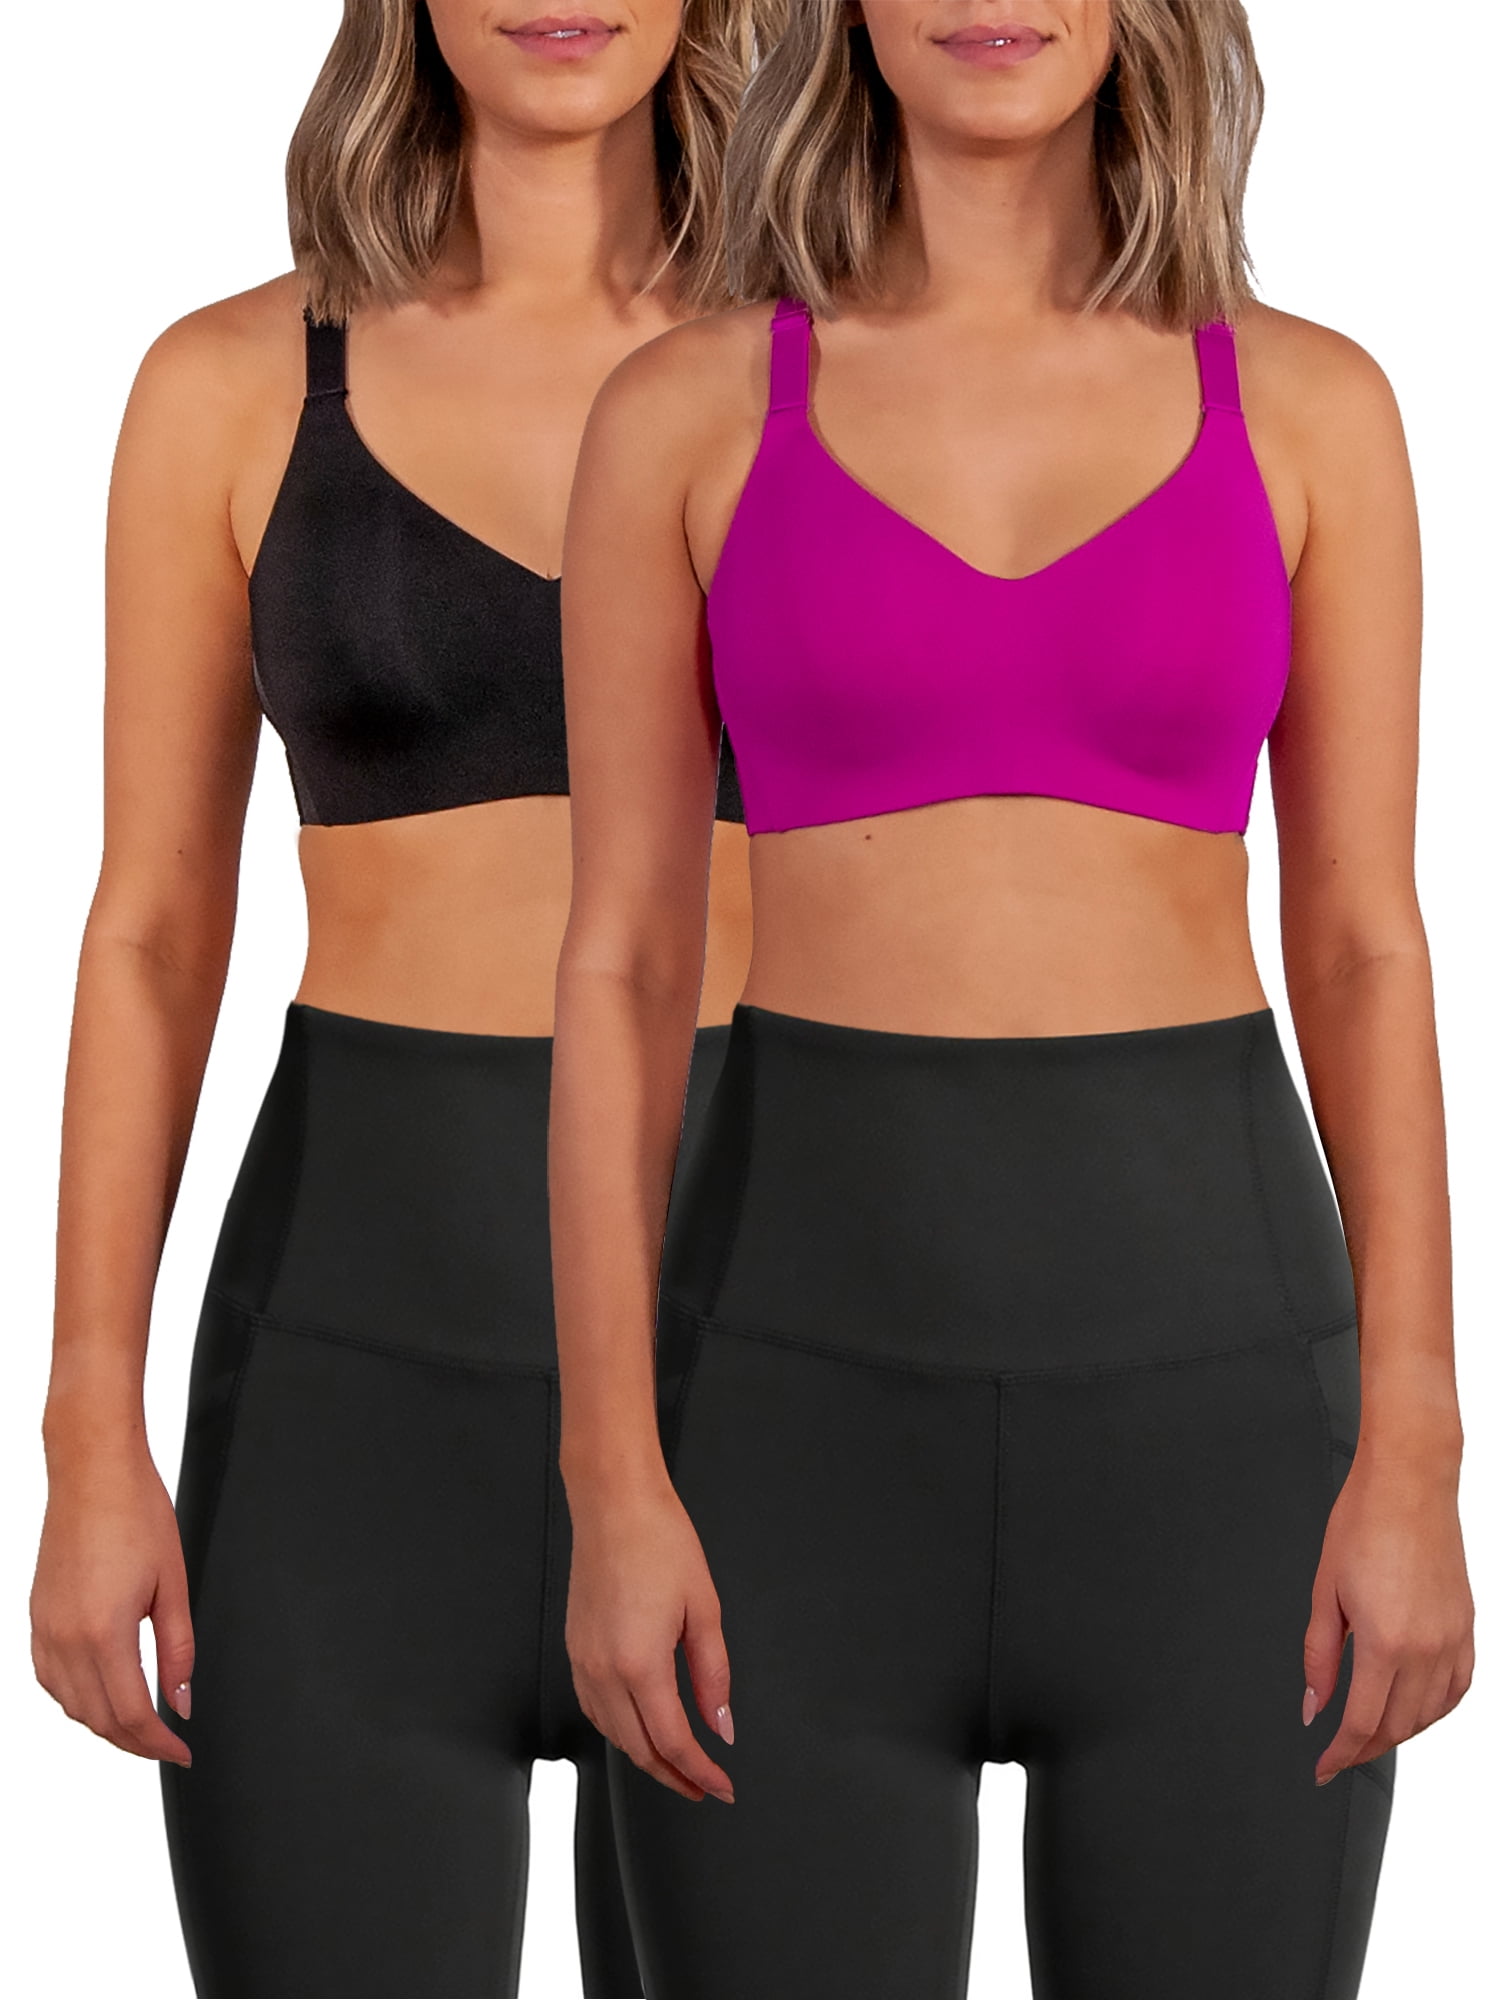 Hurley Sports Bra Large 2 Pack Padded Athletic Wear Support Workout  Training